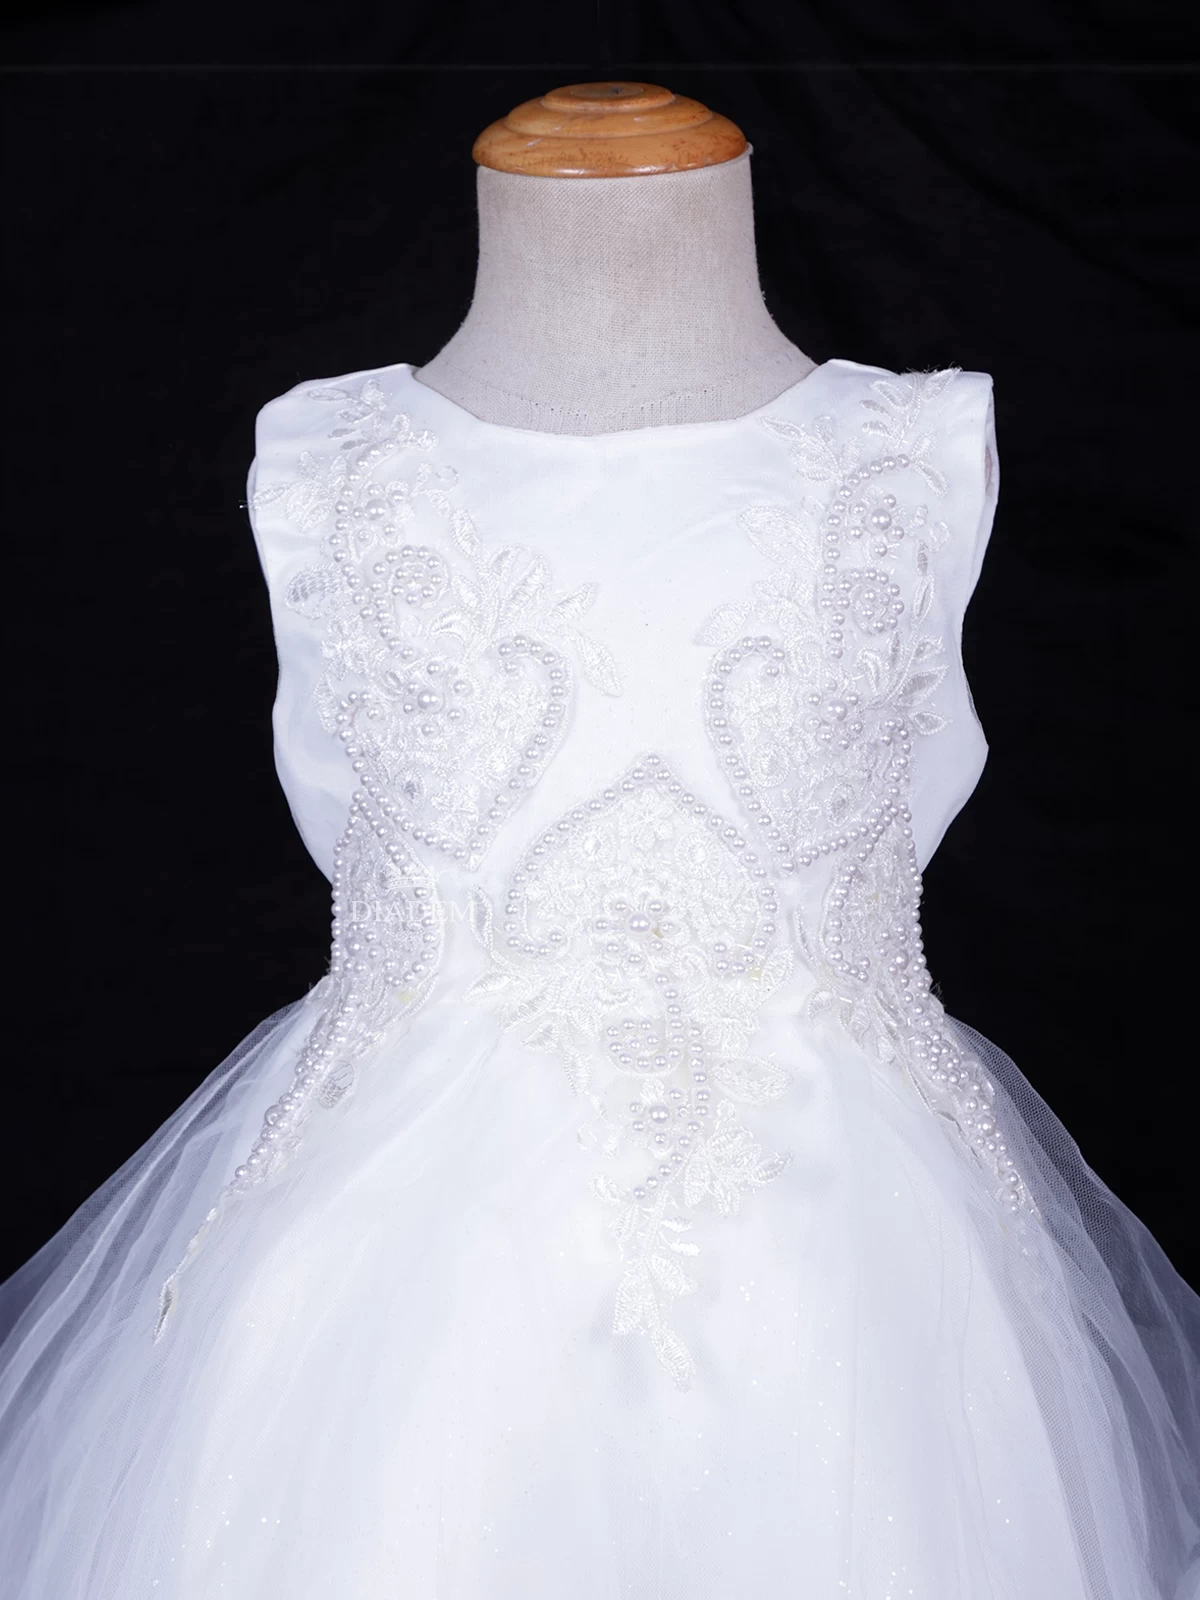 White Net Frock Embellished With Floral Laces And Pearl Beads